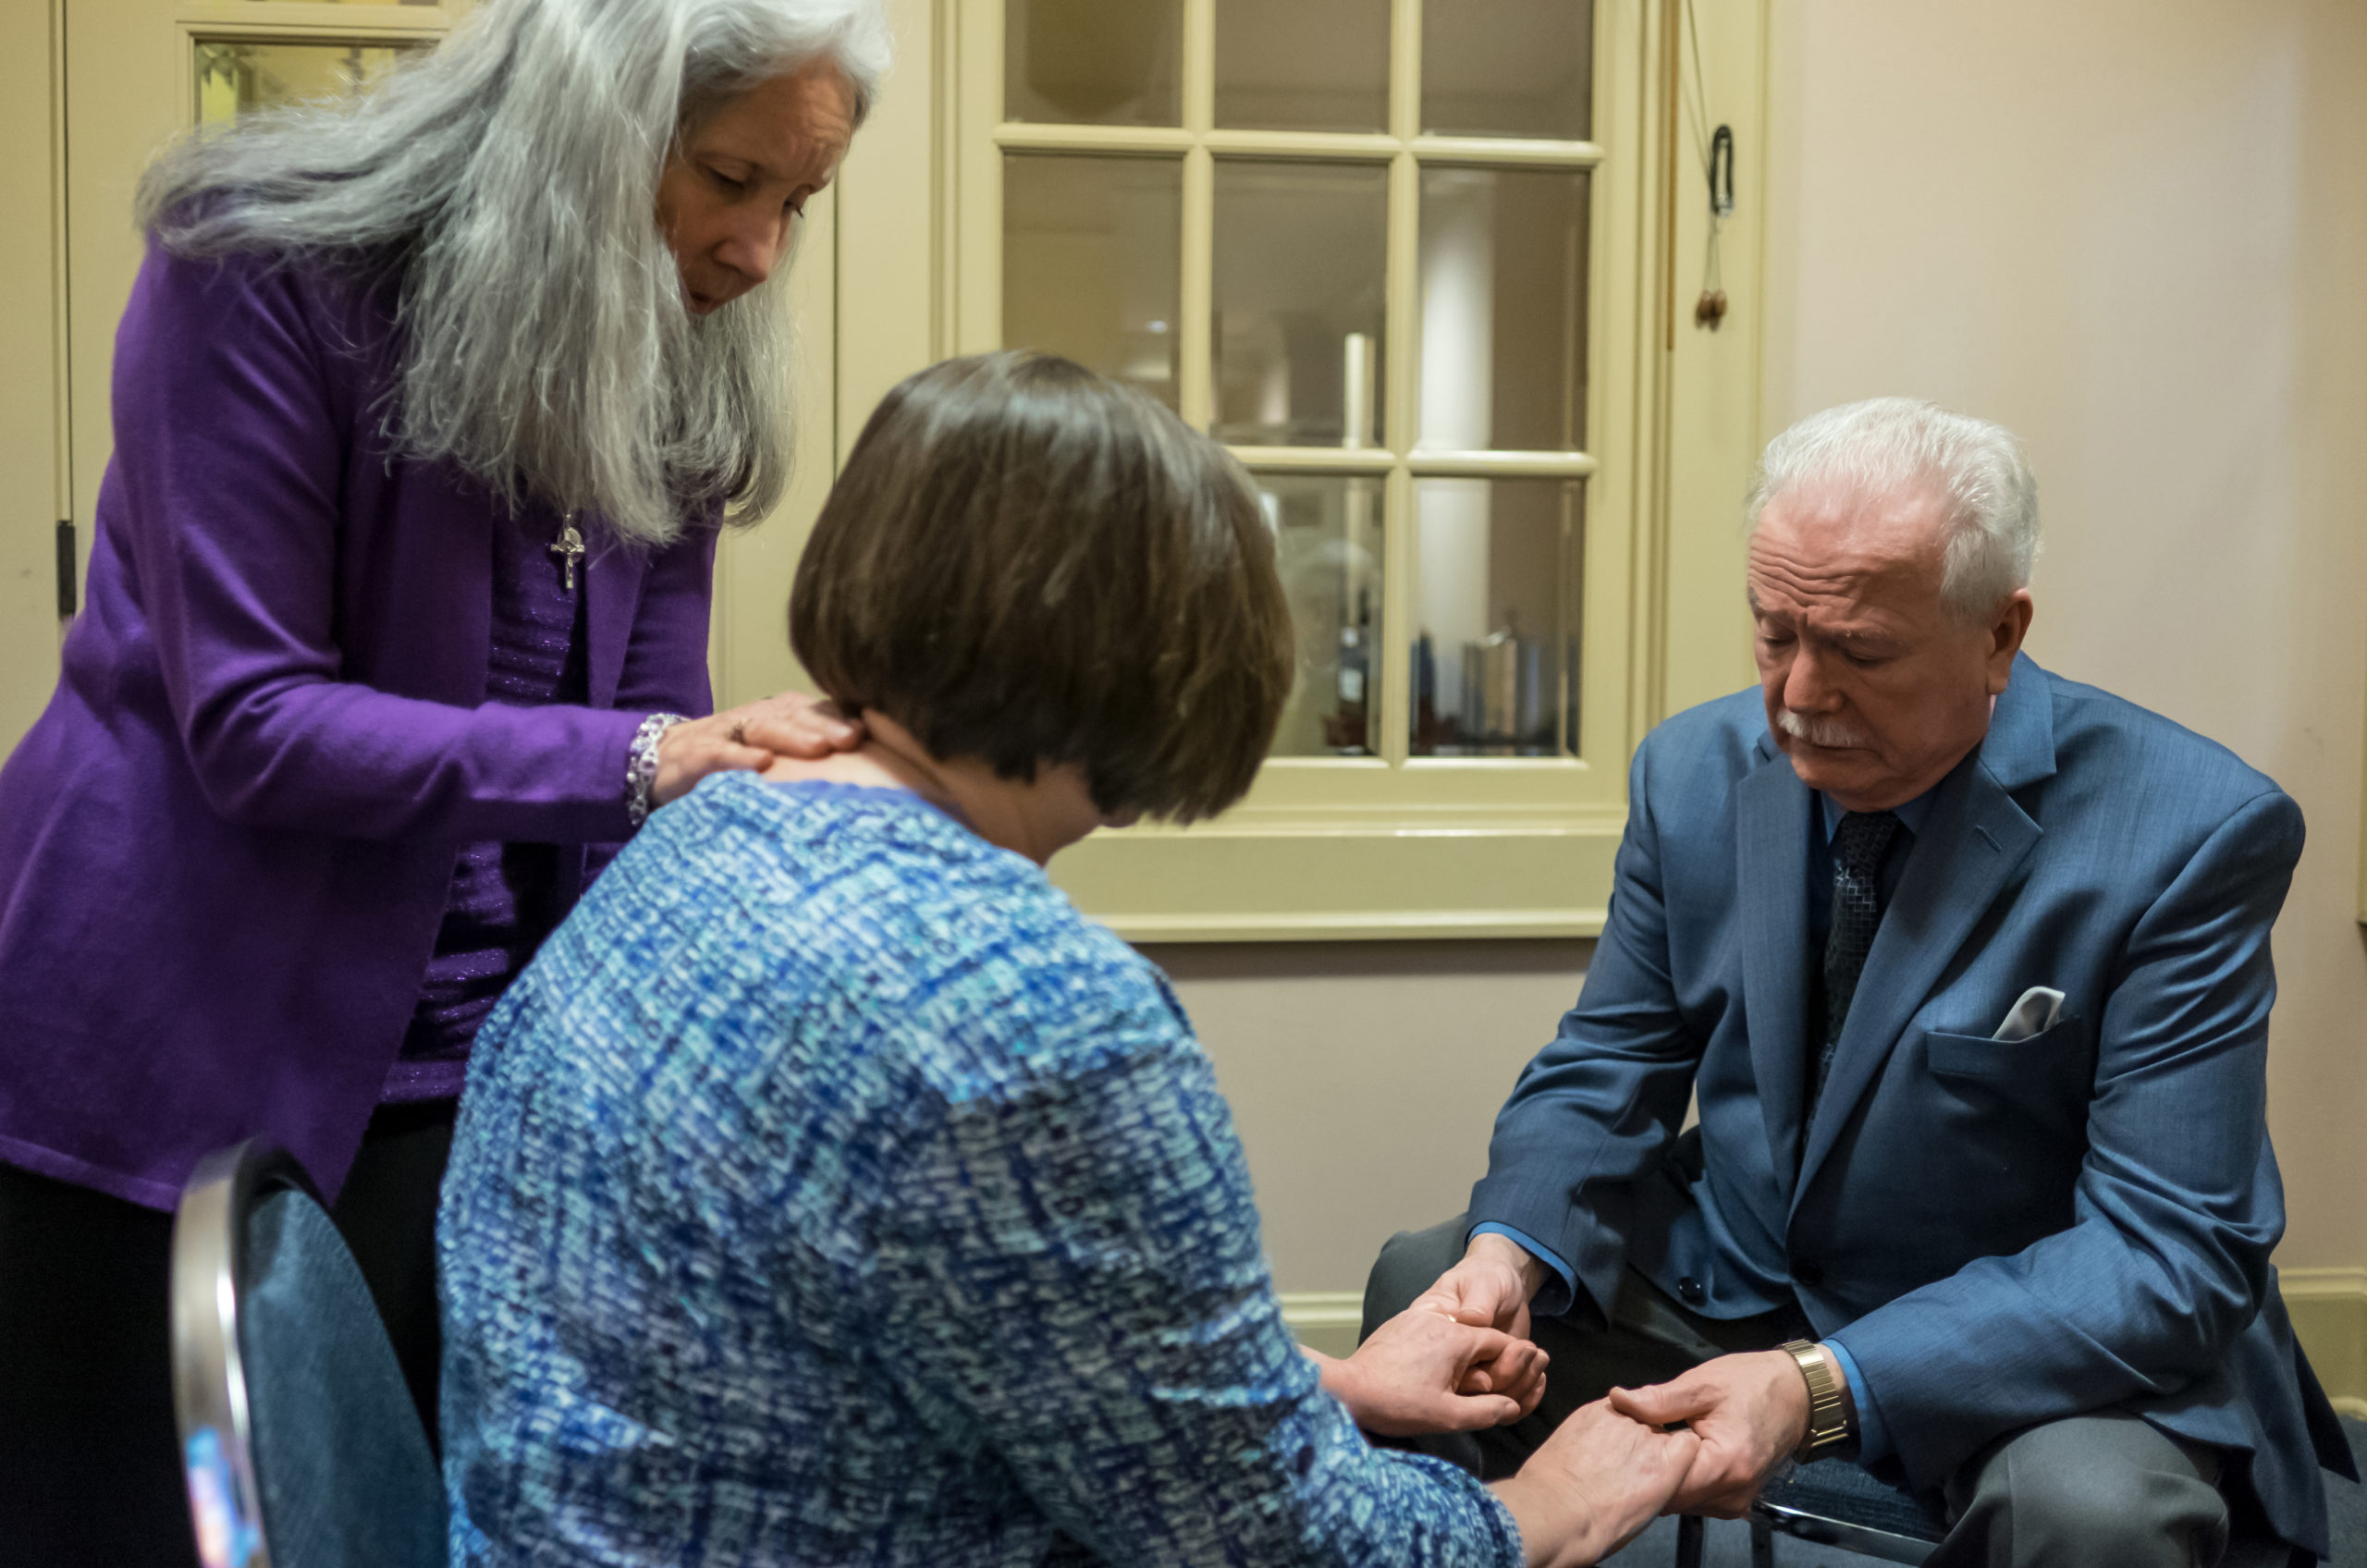 Healing Prayer Ministers John Sullivan and his wife Carmen pray with a supplicant after Mass at Our Lady of Perpetual Hope Parish Church on Sunday November 15, 2015 in Everett, Washington. (PHOTO by Stephen Brashear)